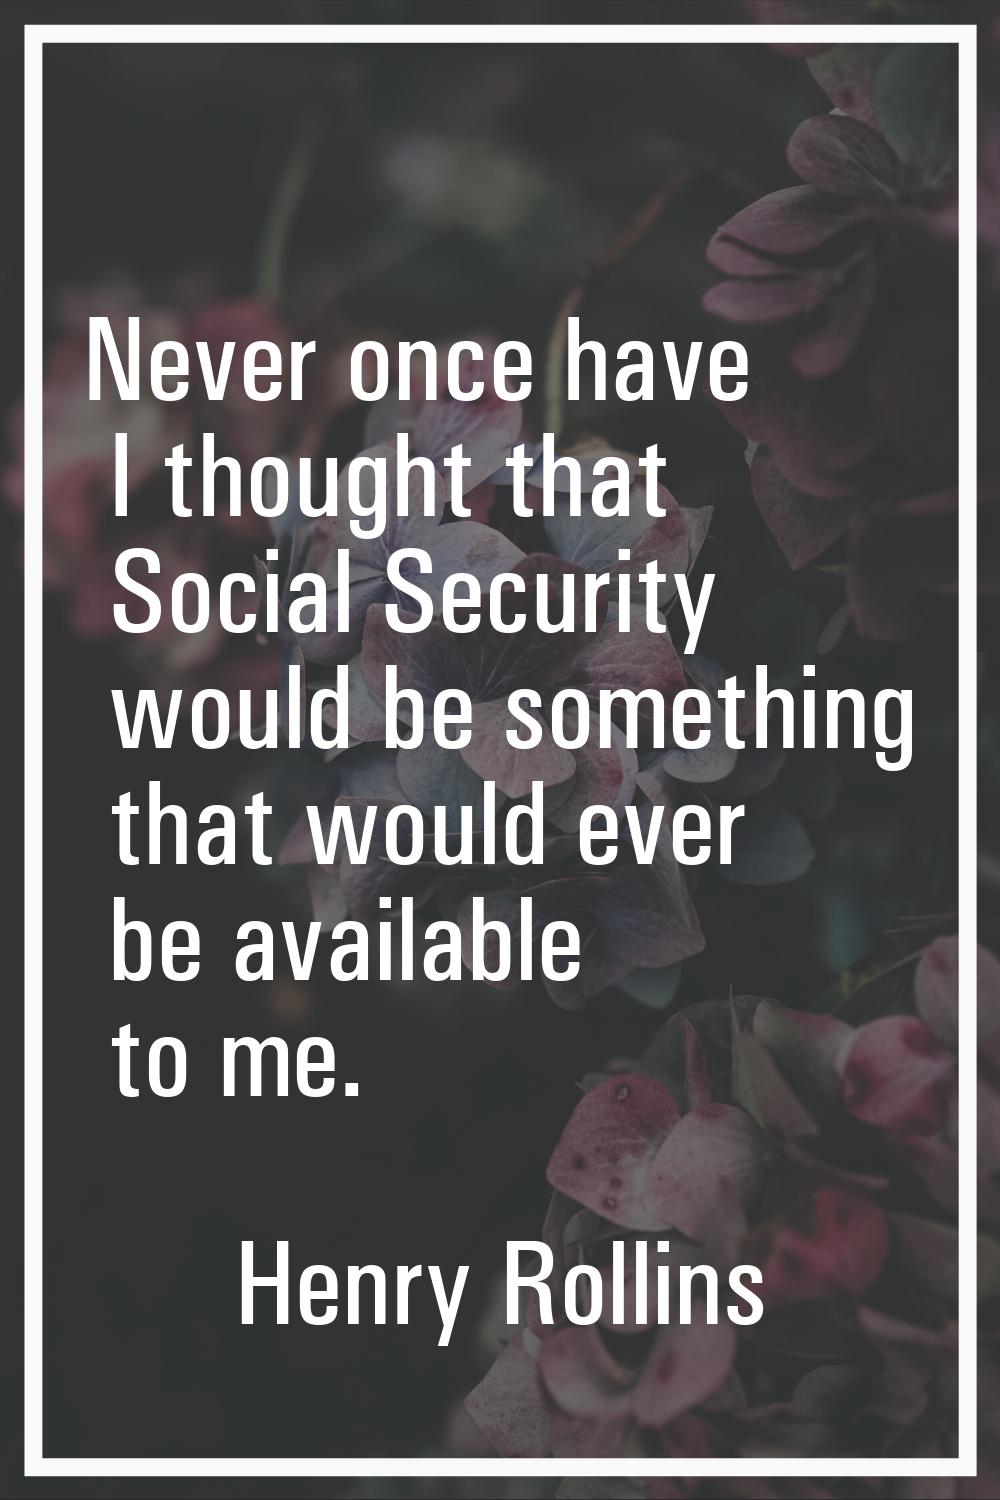 Never once have I thought that Social Security would be something that would ever be available to m